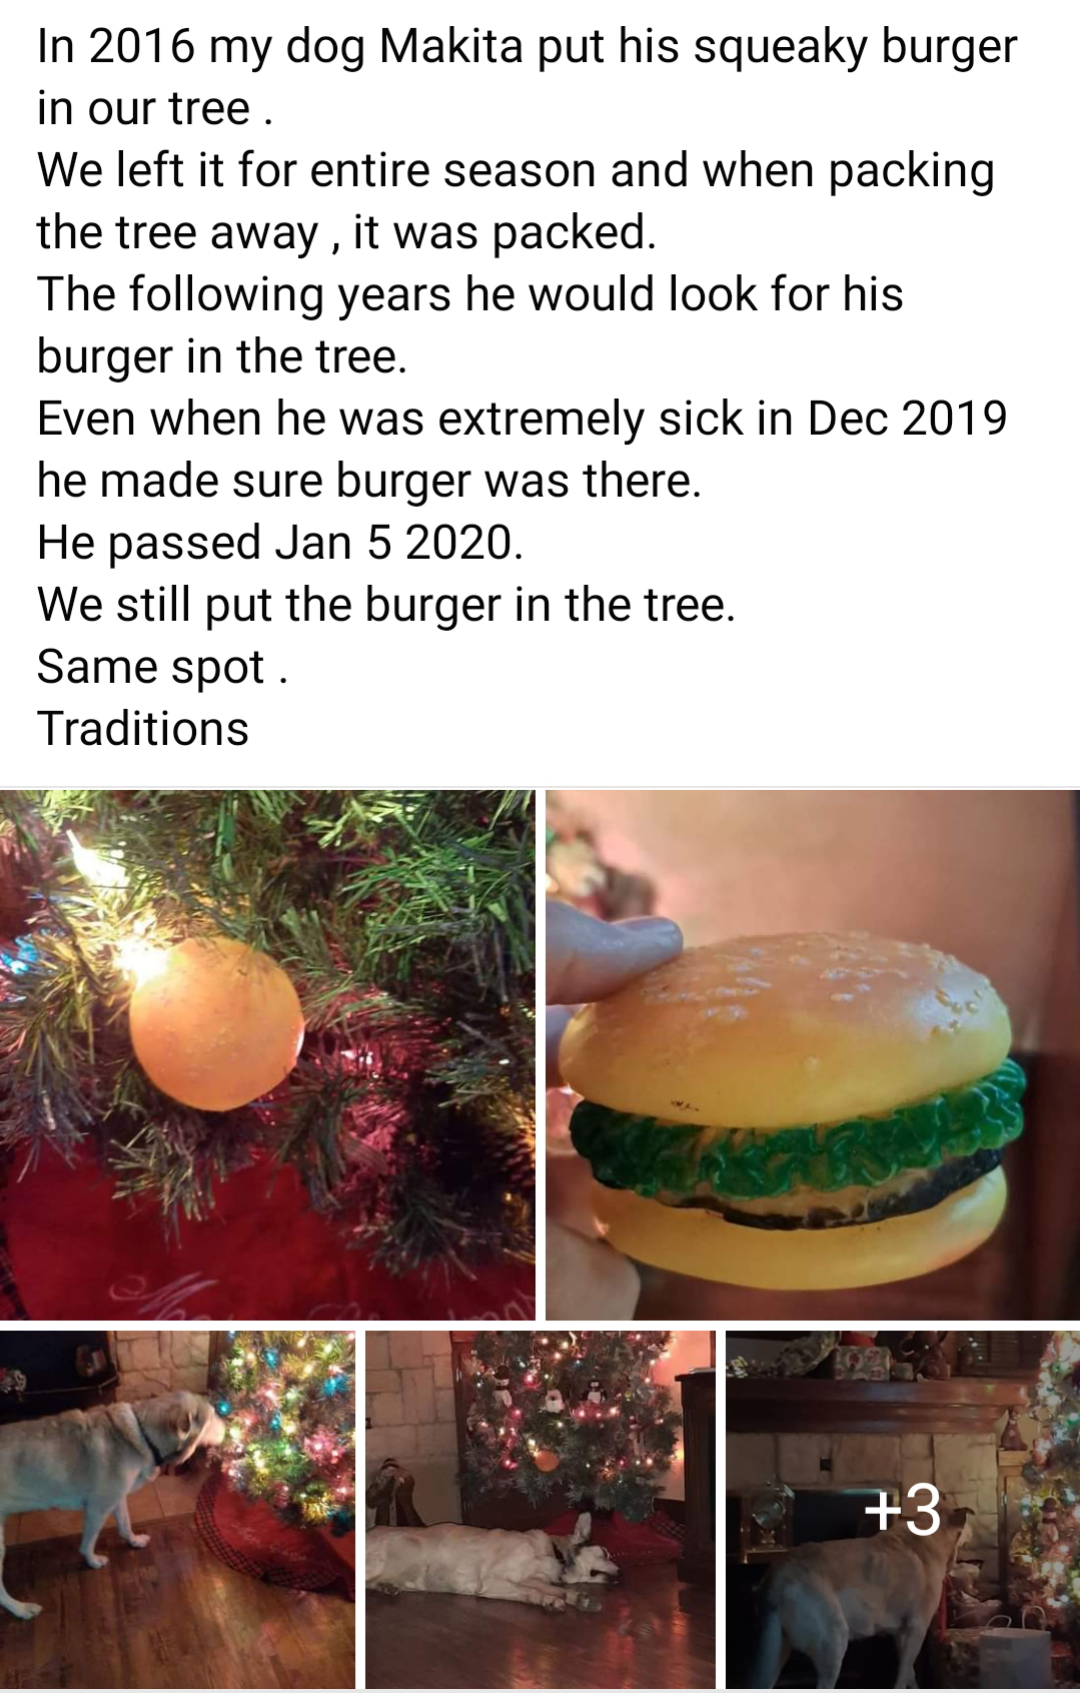 Their dog put his squeaky cheeseburger toy in the Xmas tree one year and it got packed away with the tree; the dog would look for his toy in the tree every year after, even when he was very sick; when he died, they put the toy in the tree at the same spot